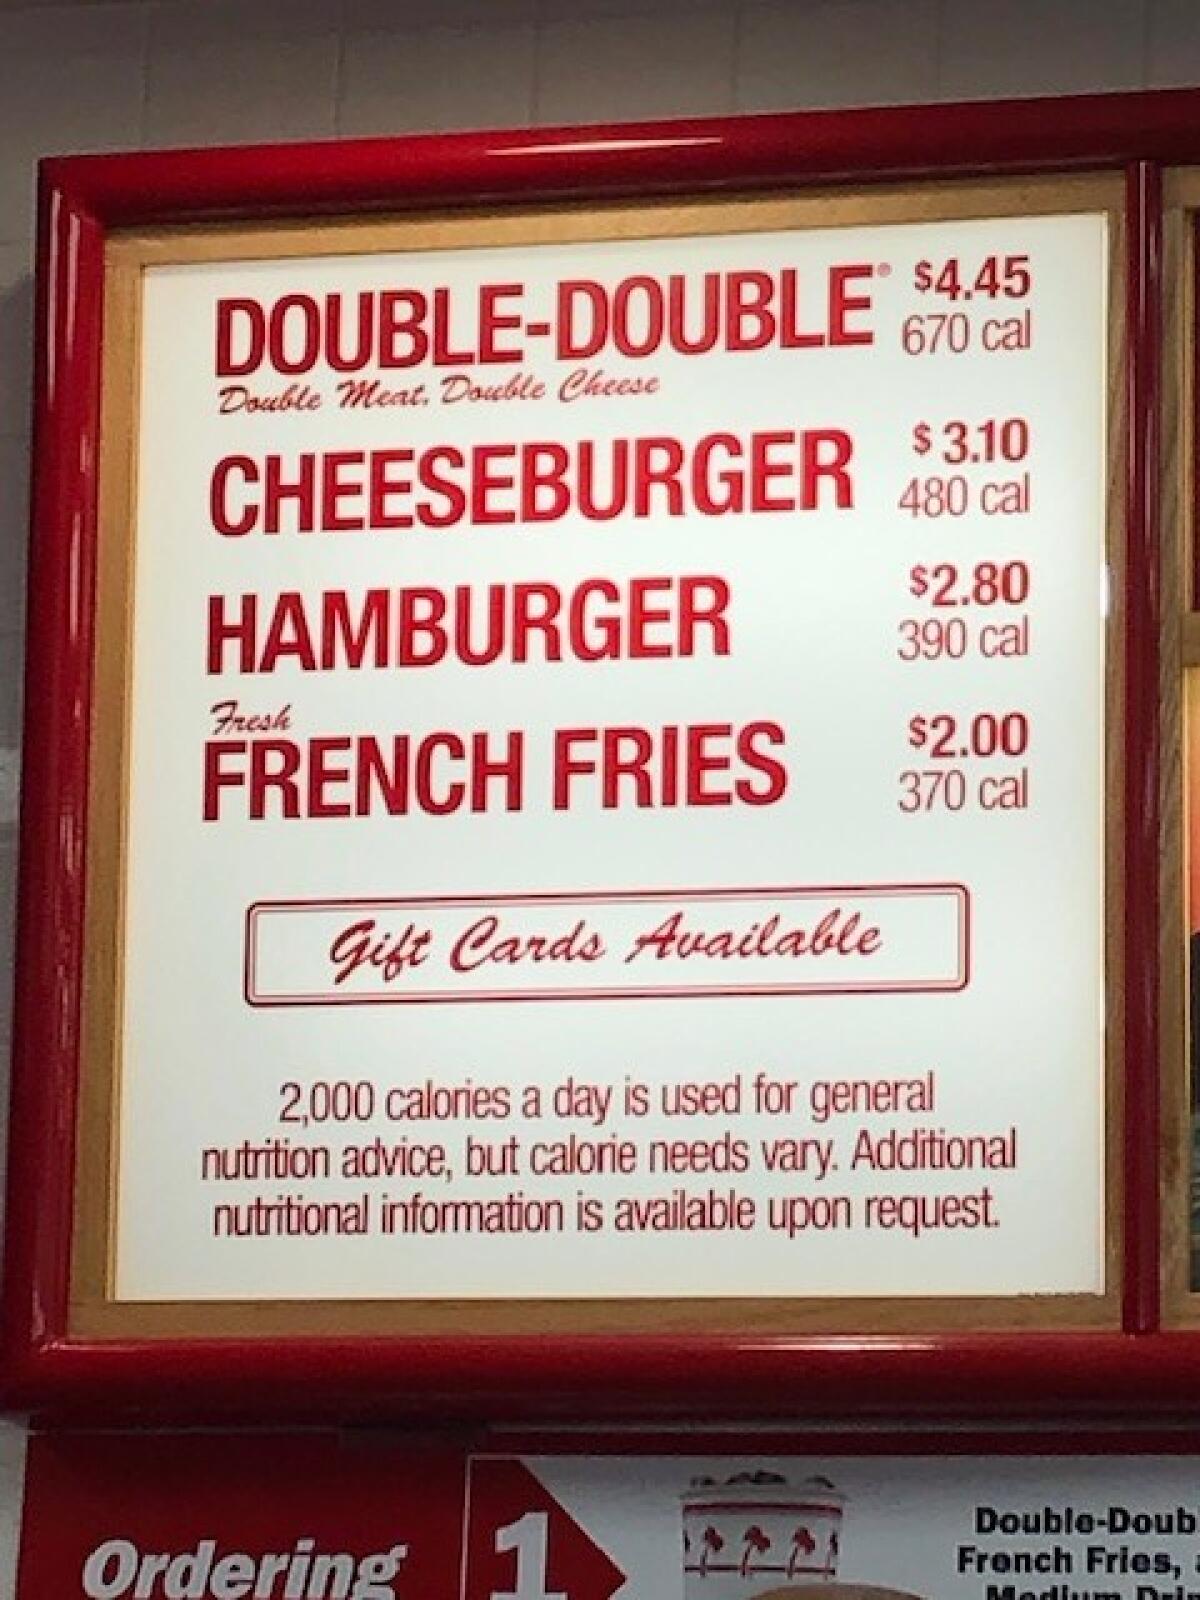 In-N-Out prices near its headquarters.